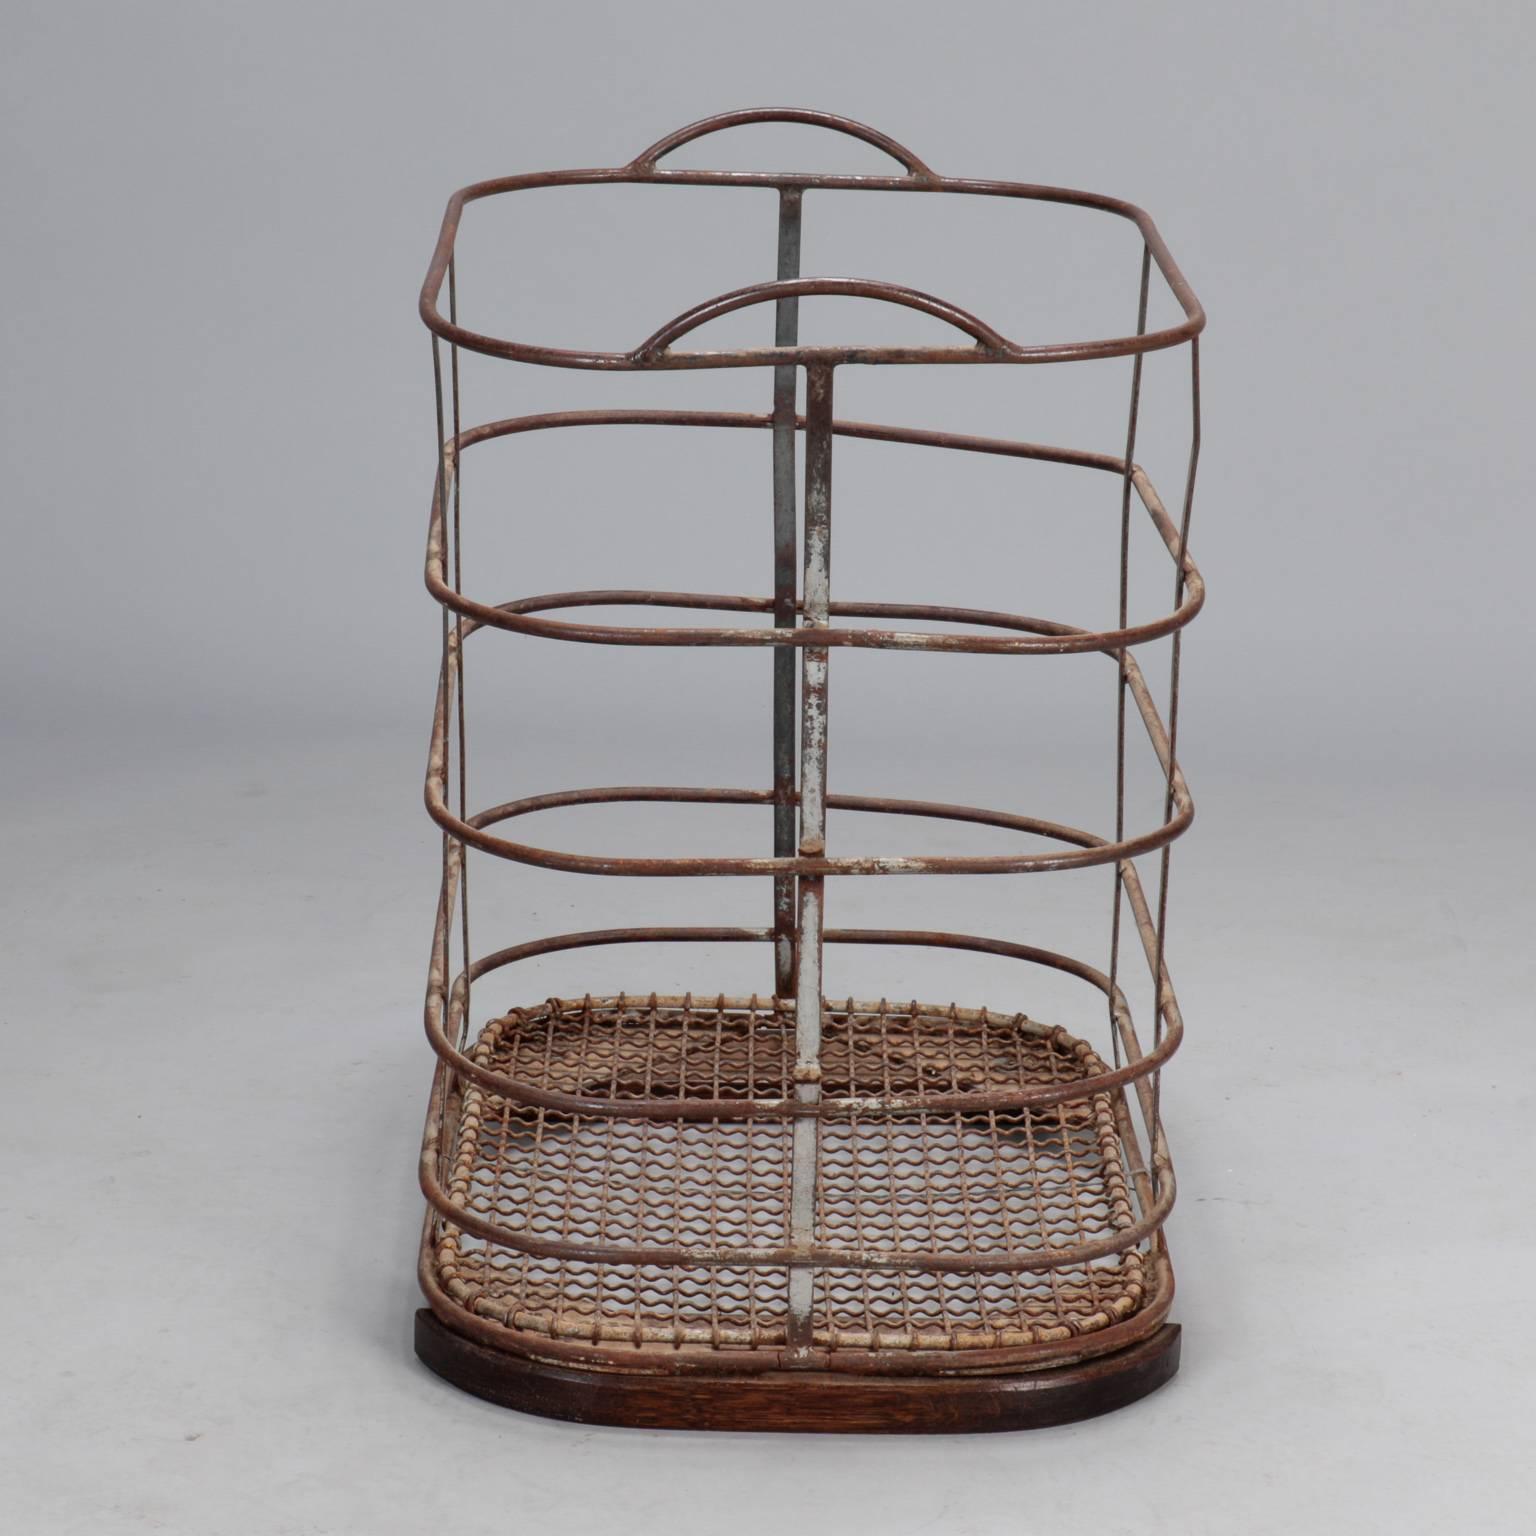 French industrial bin with rusted patina, mesh covered base and open work ribbed sides, circa 1900s. Handles on both sides at top. Originally from a factory.